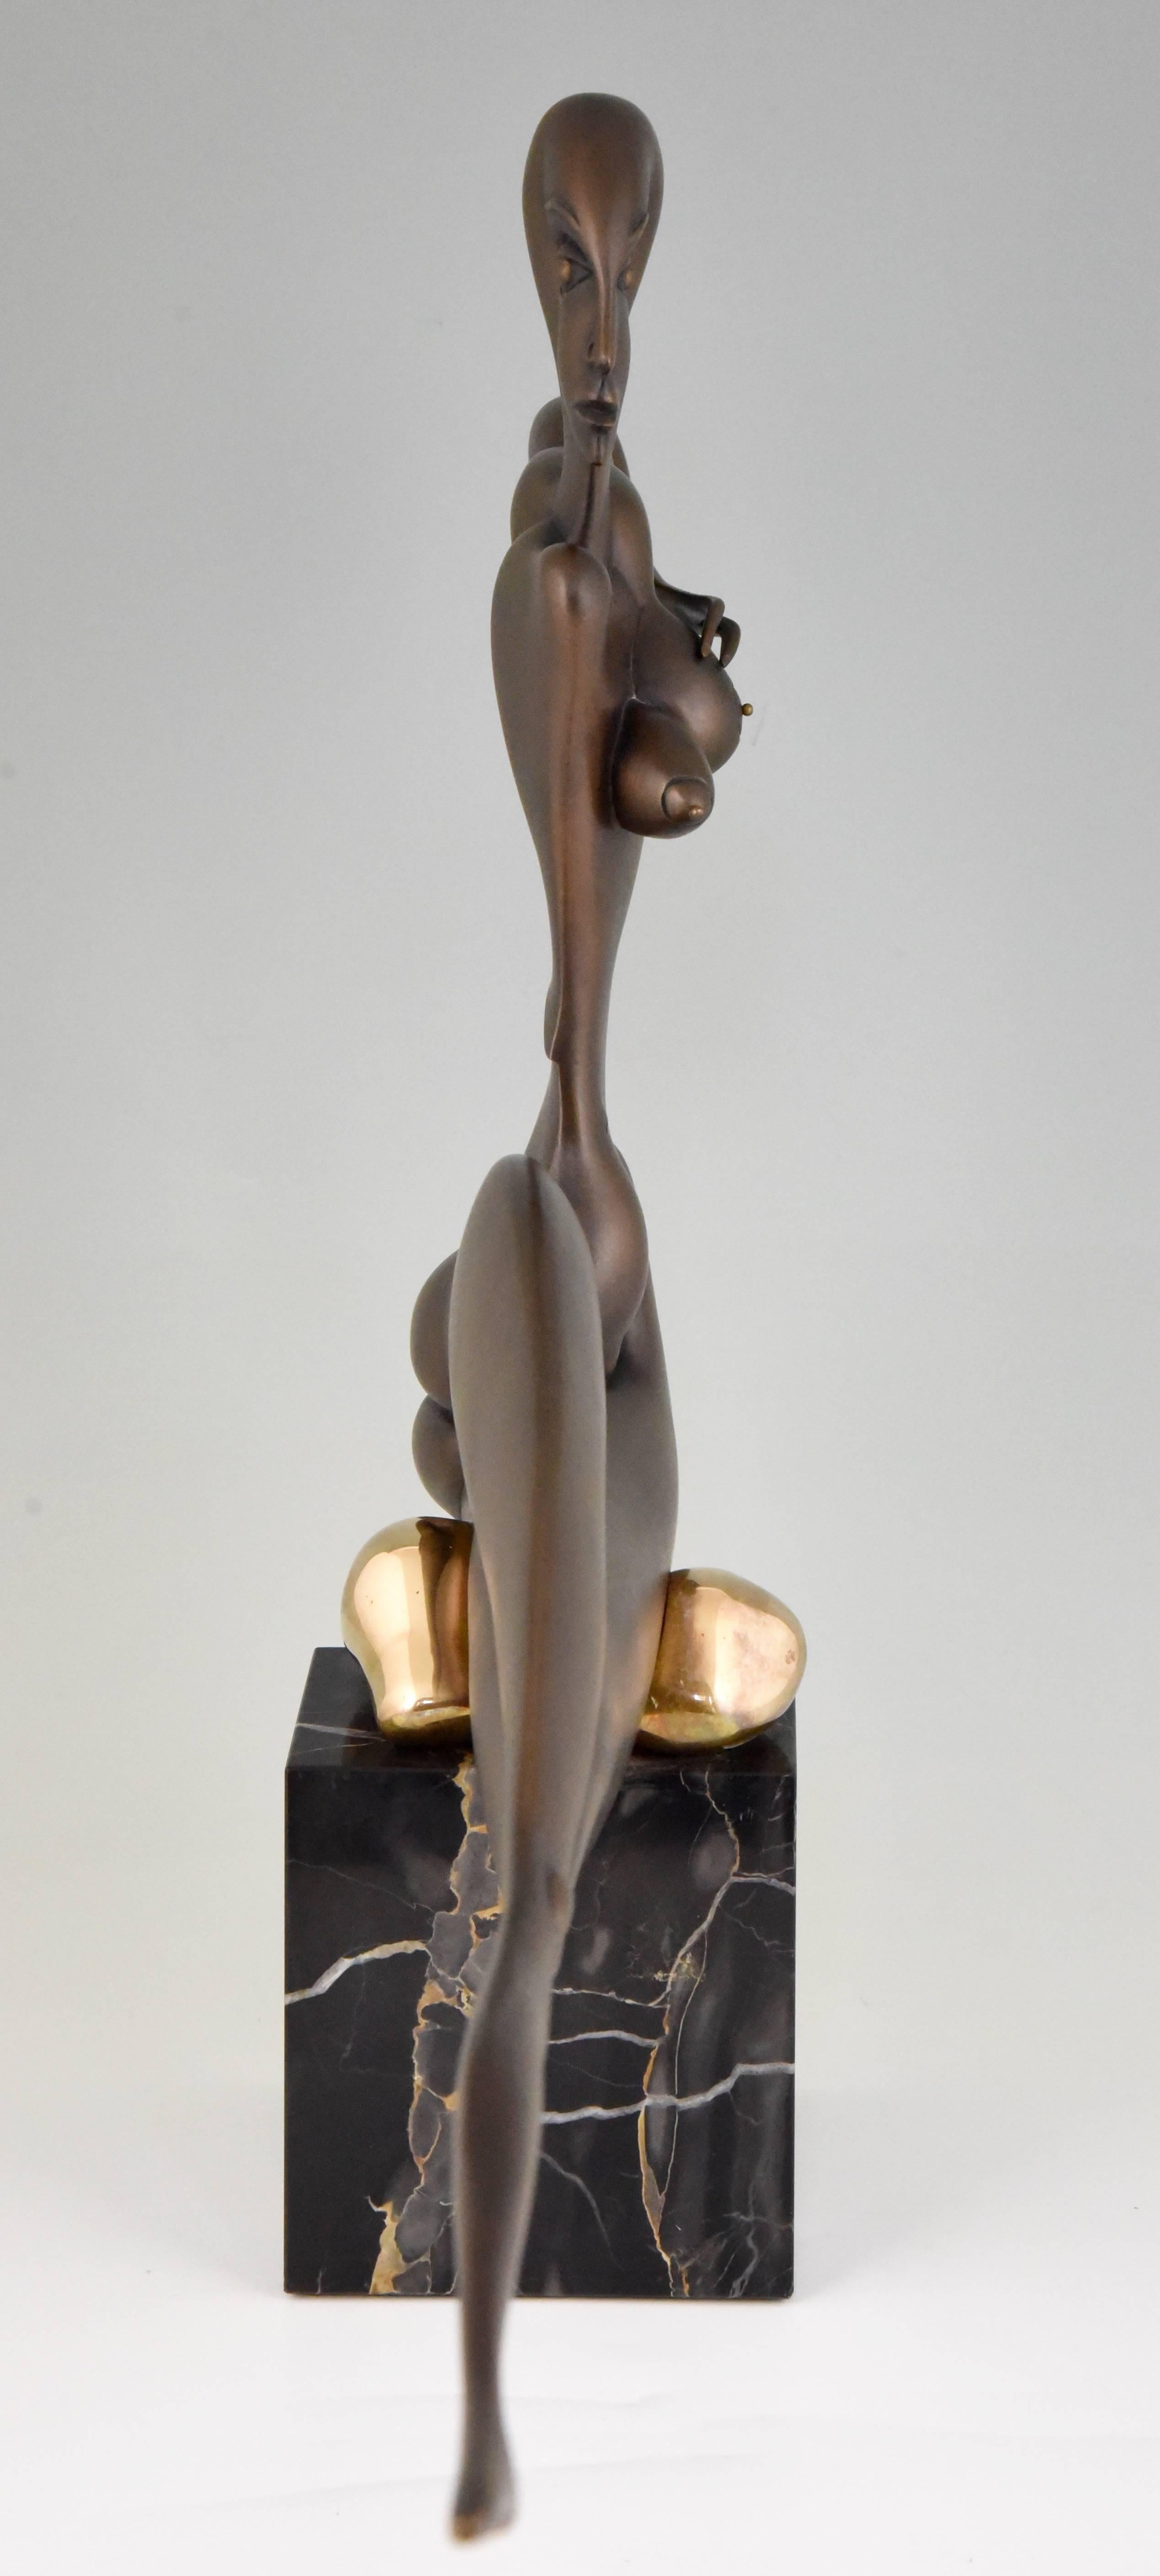 German Modern Bronze Sculpture of a Nude Paul Wunderlich Signed and Numbered